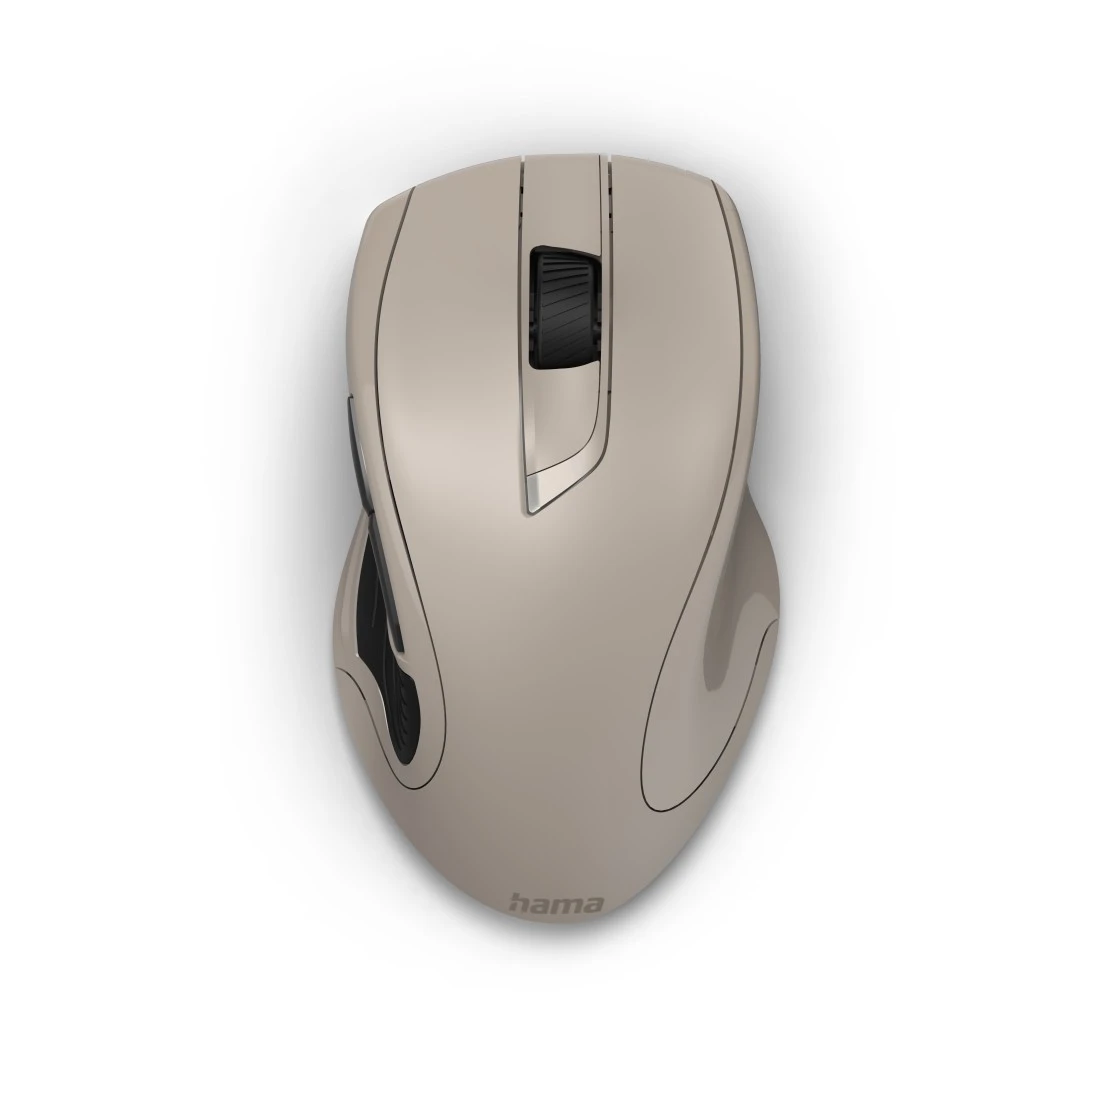 Hama 00173019 MW-900 V2 7-Button Laser Wireless Mouse, beige